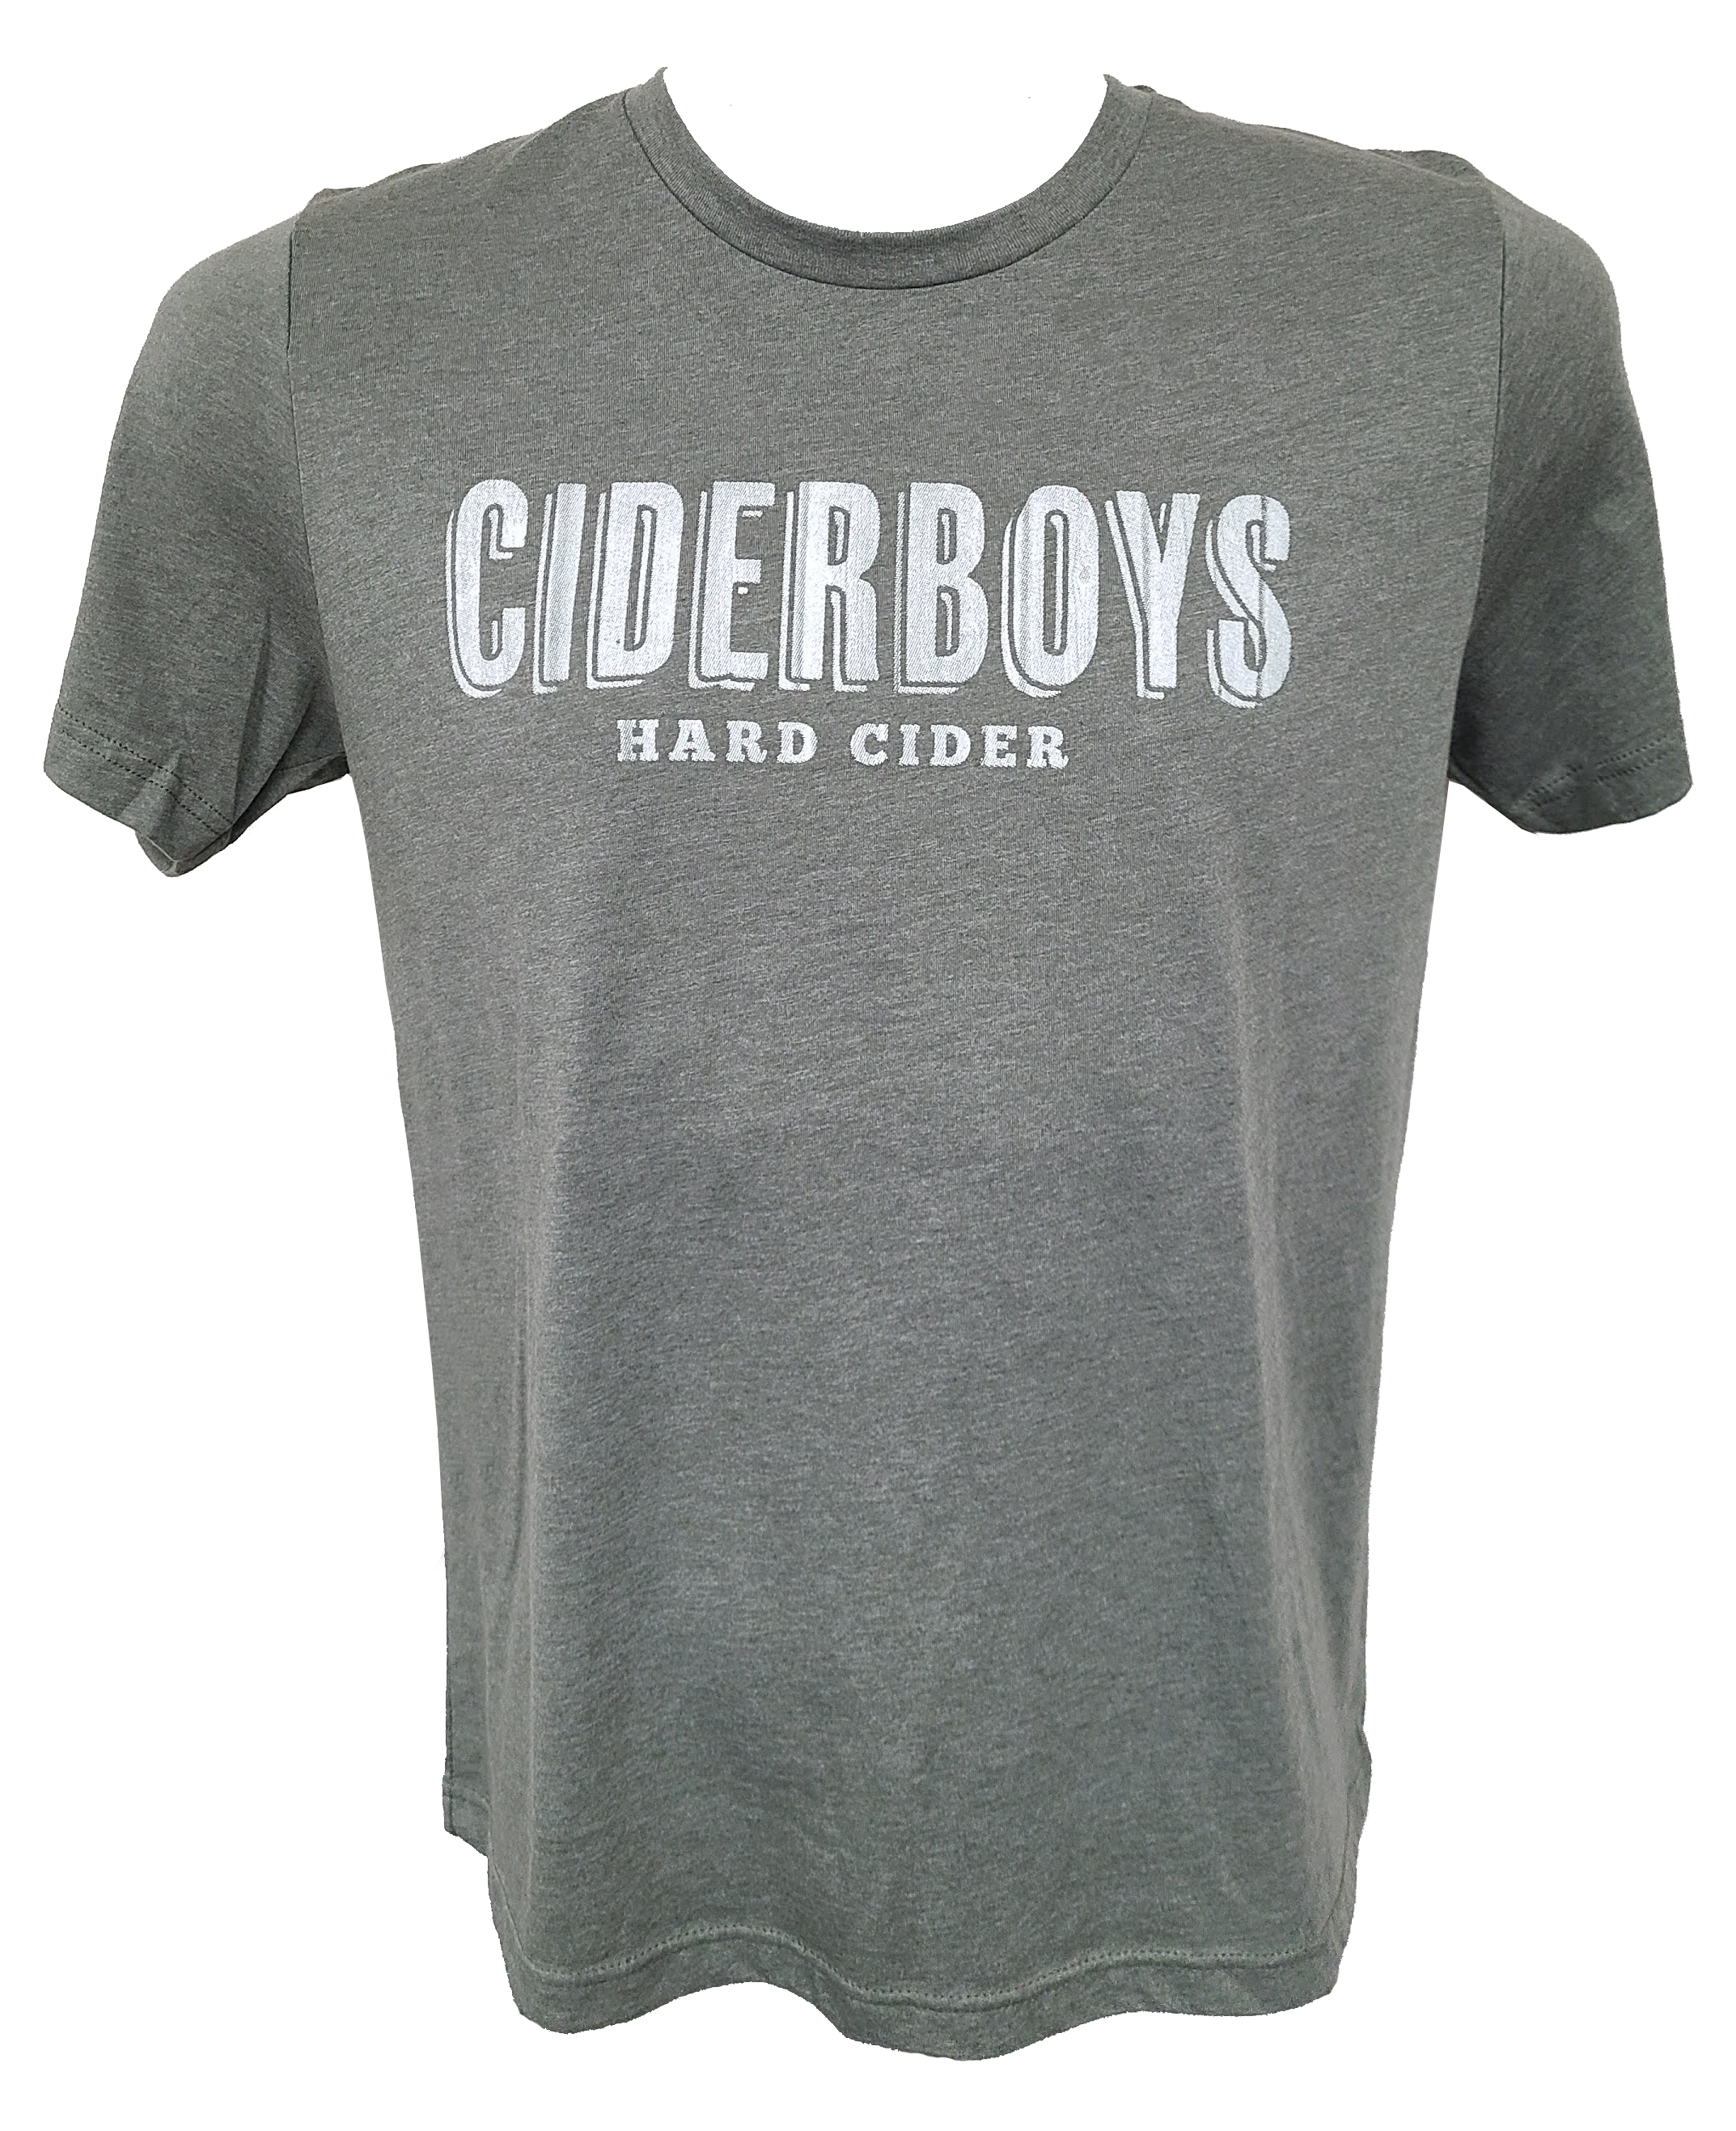 Product Image - Ciderboys Green Tee